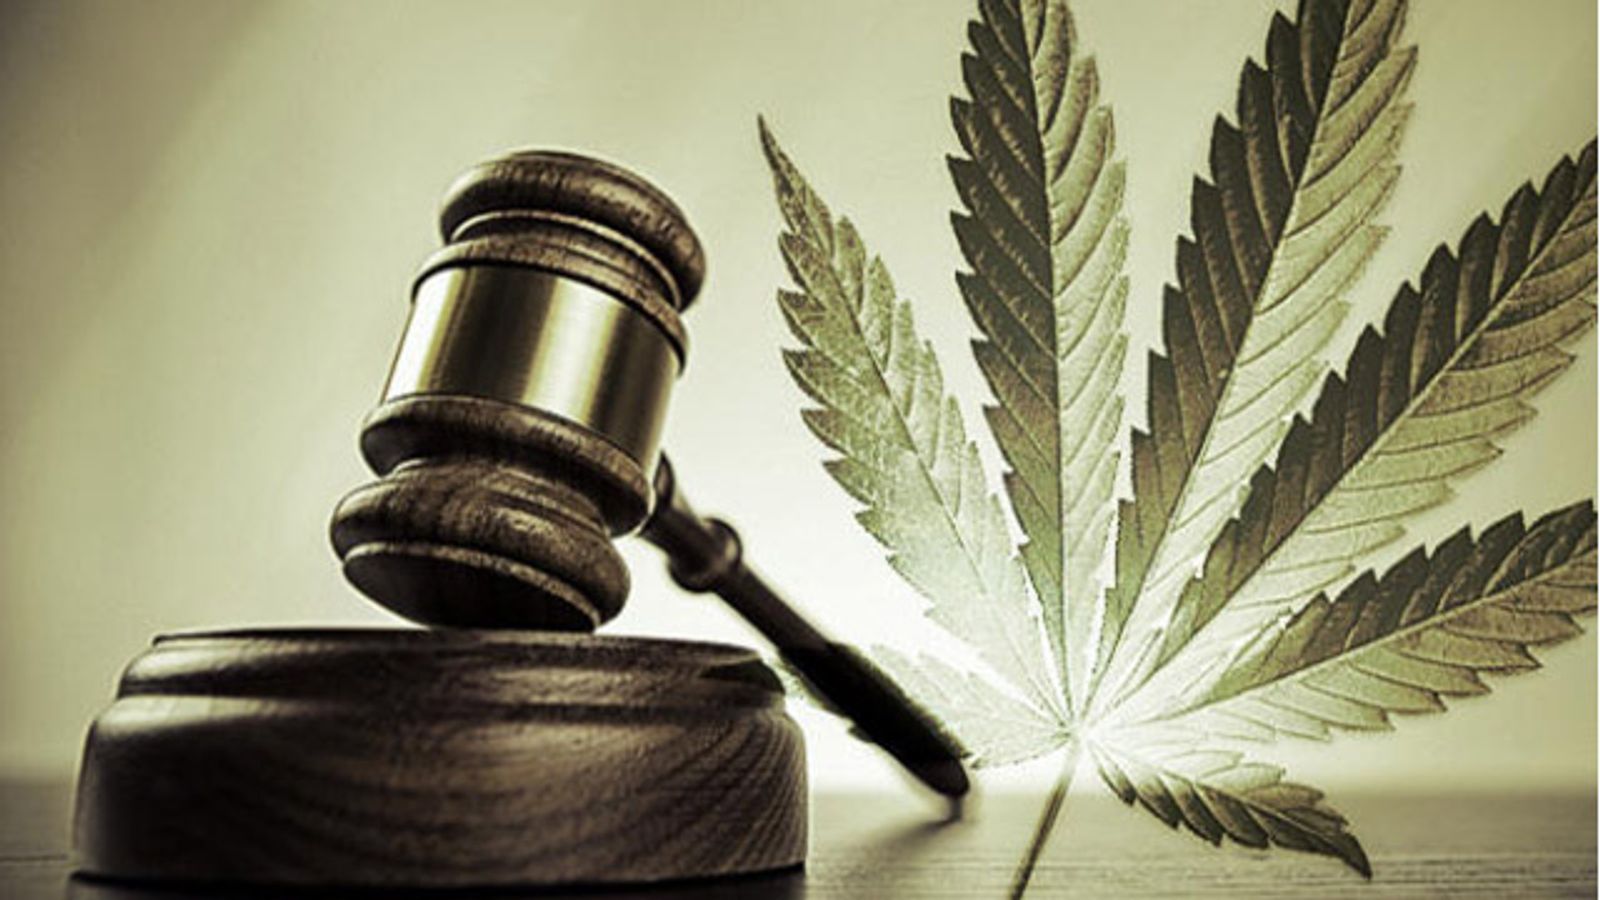 Pot, NORML and the New Normal